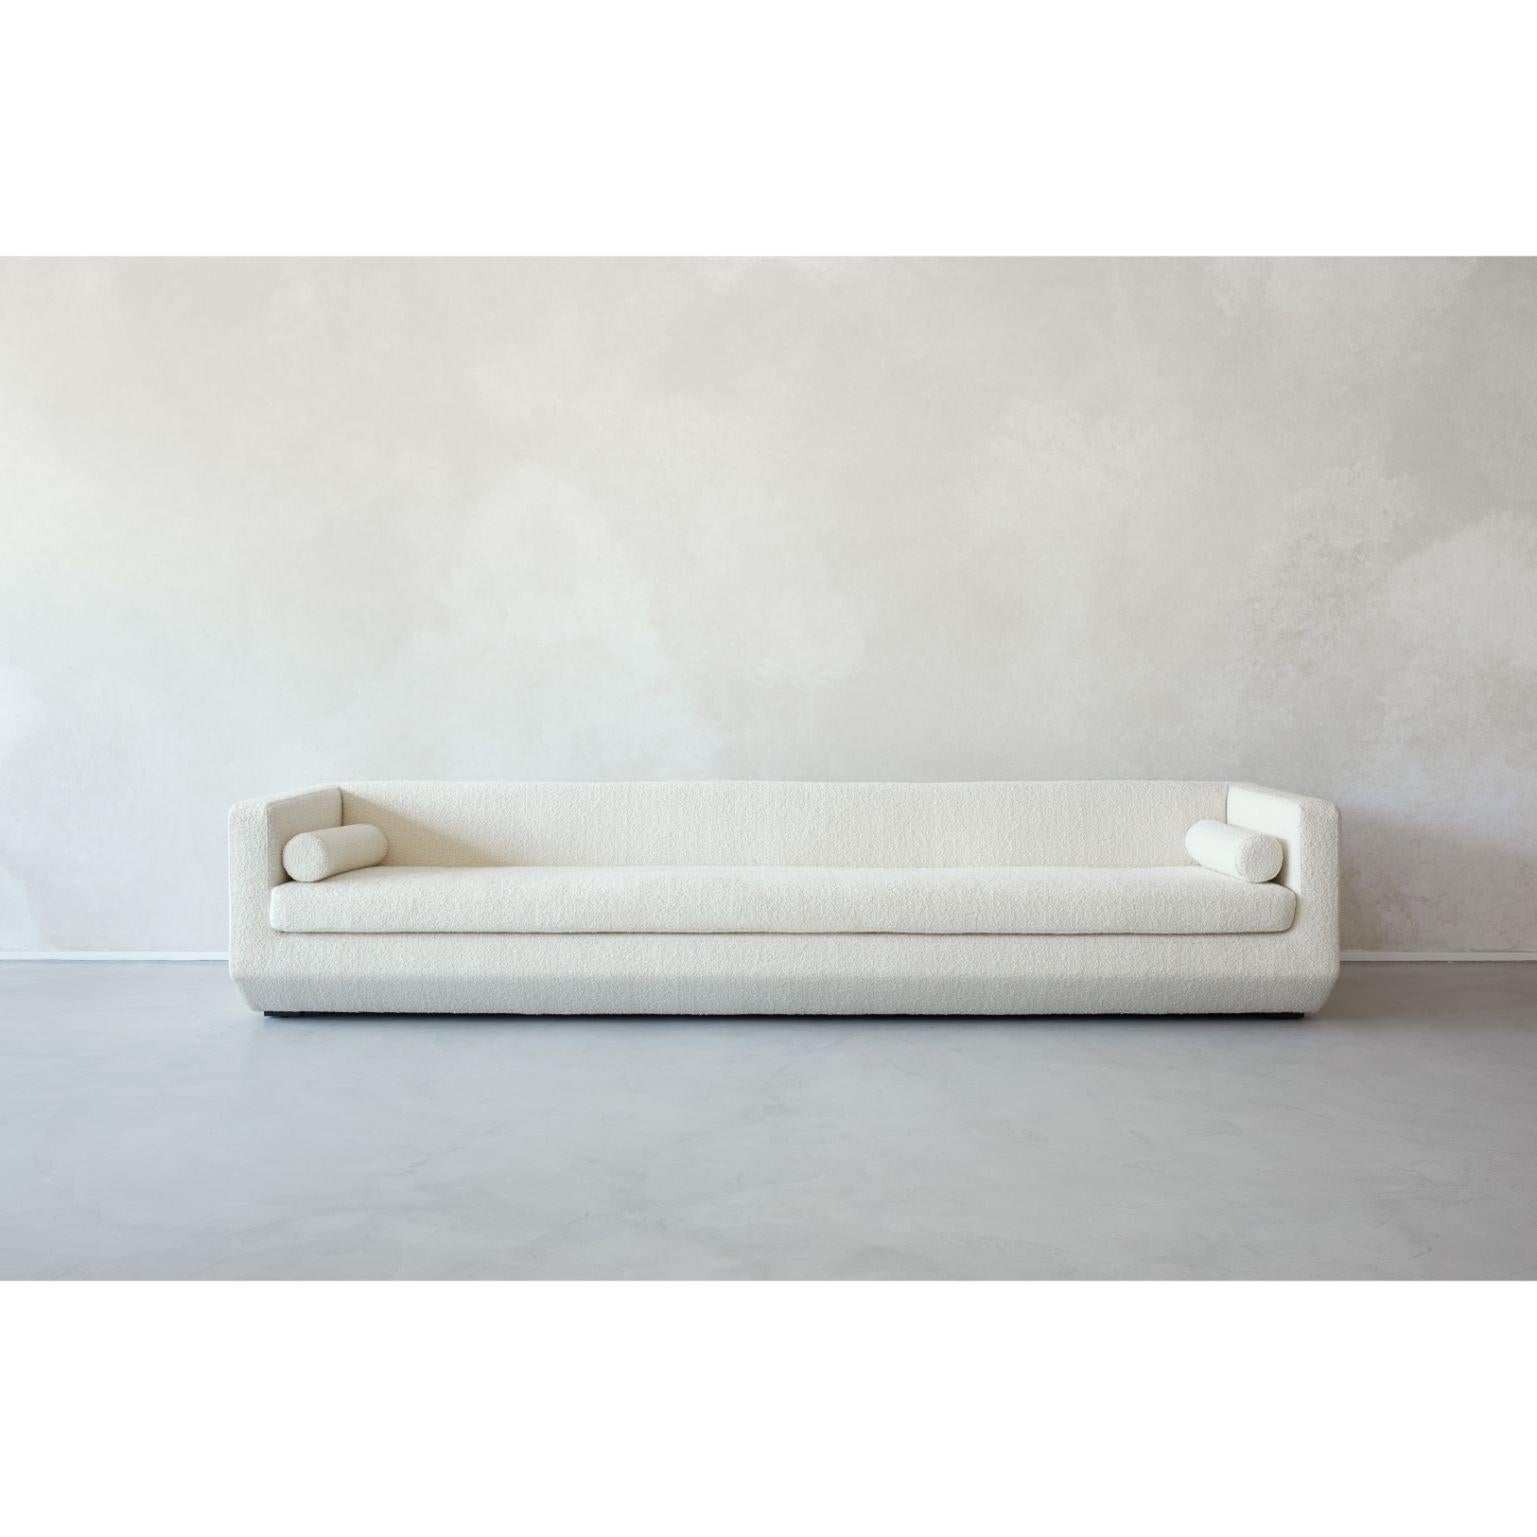 Small beveled - Couch by Marc Dibeh
2021
Materials: Fabric
Dimensions: W 180 x H 63 x D 80 cm 

Also available: Large

Beirut based designer Marc Dibeh narrates his cultural environment through compelling interiors and products.
His studio’s